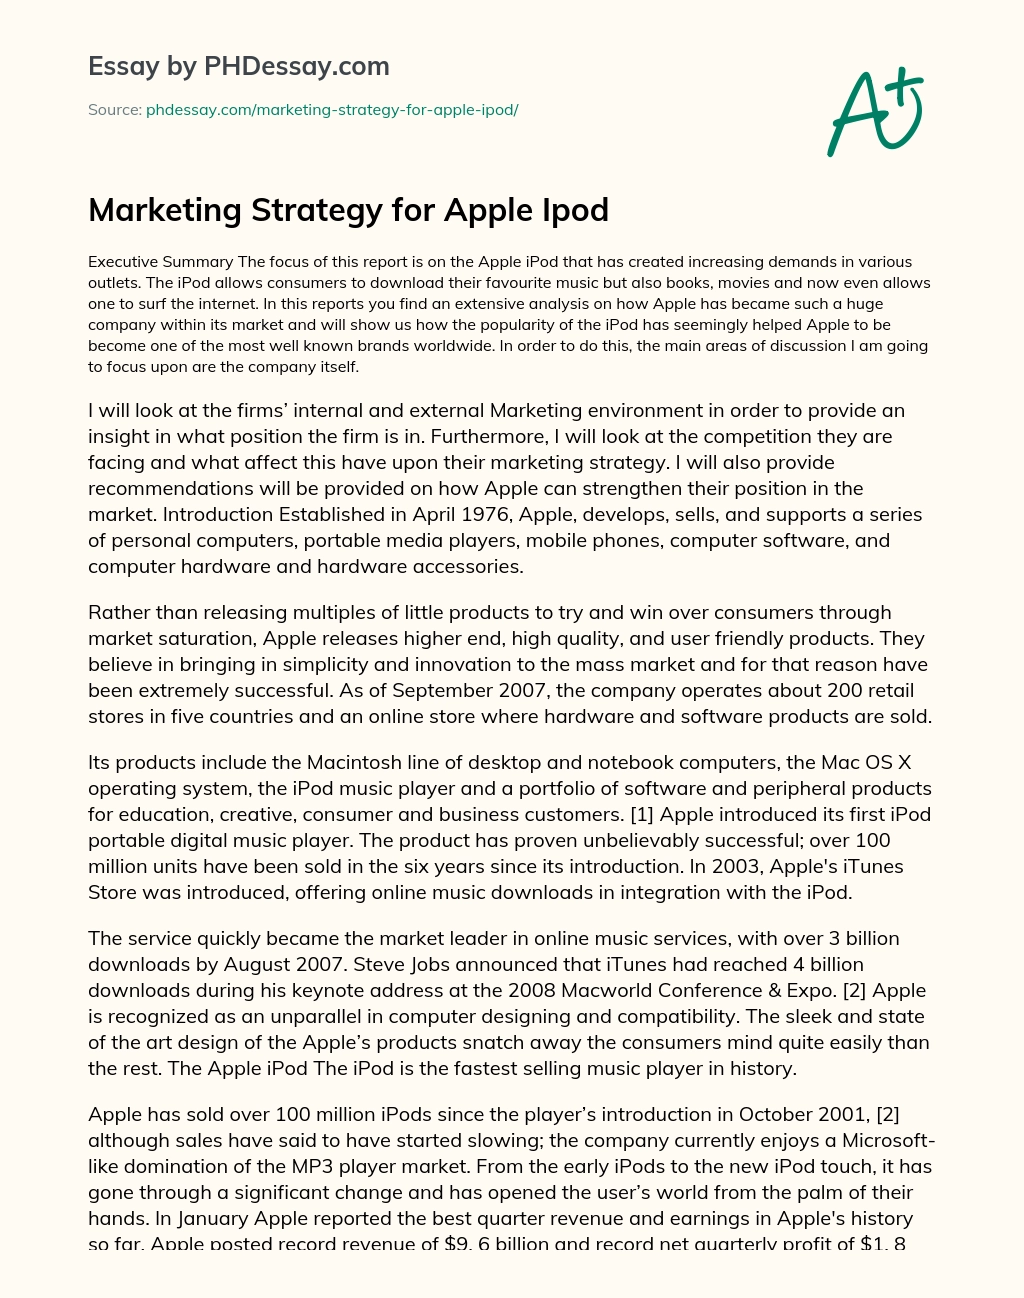 Marketing Strategy for Apple Ipod essay